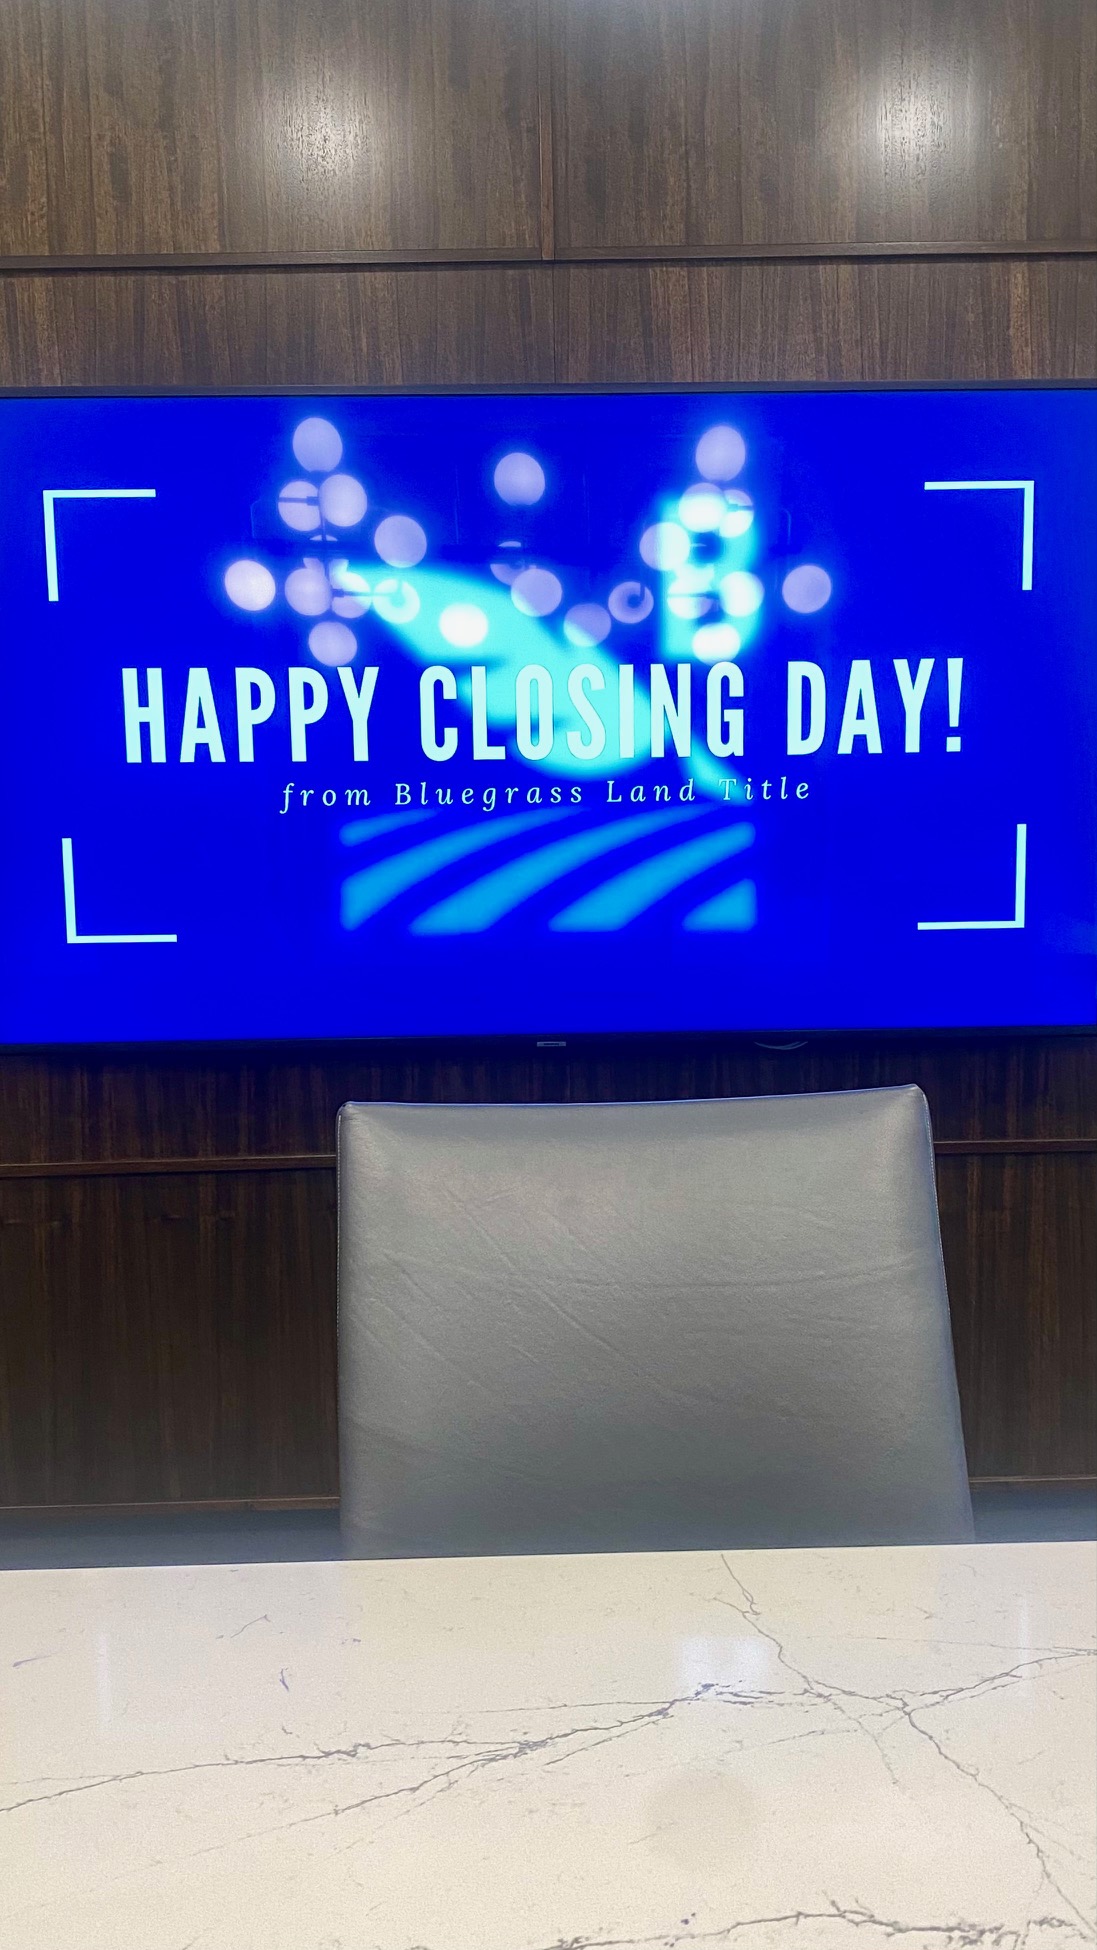 TV in meeting space with the words "Happy Closing Day" written on it.